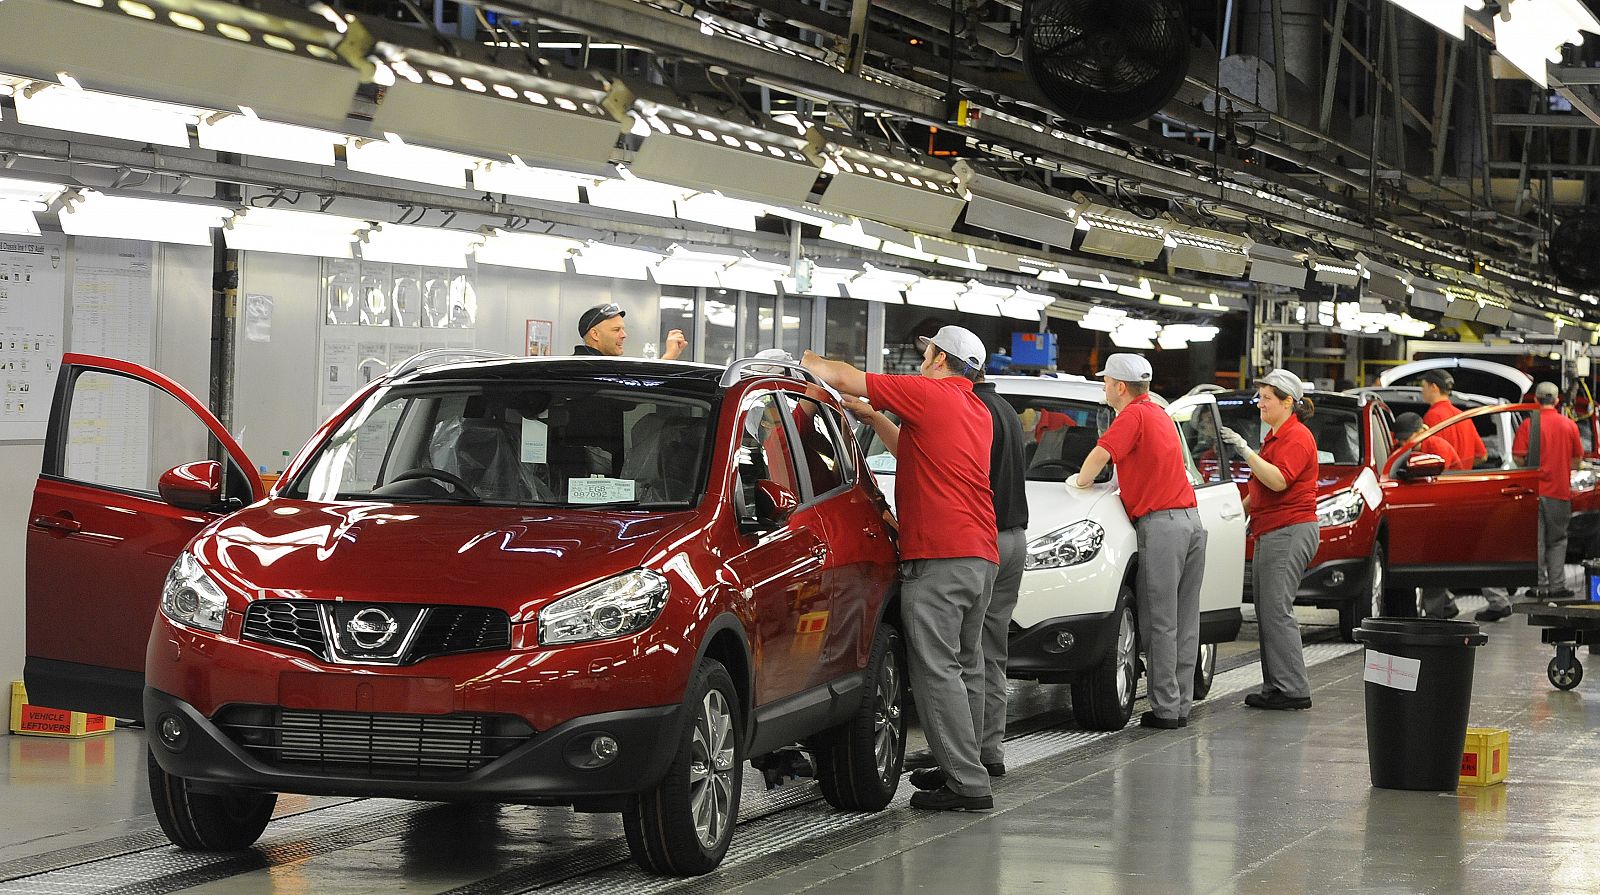 A worker is seen completing final checks on the production line at Nissan car plant in Sunderland